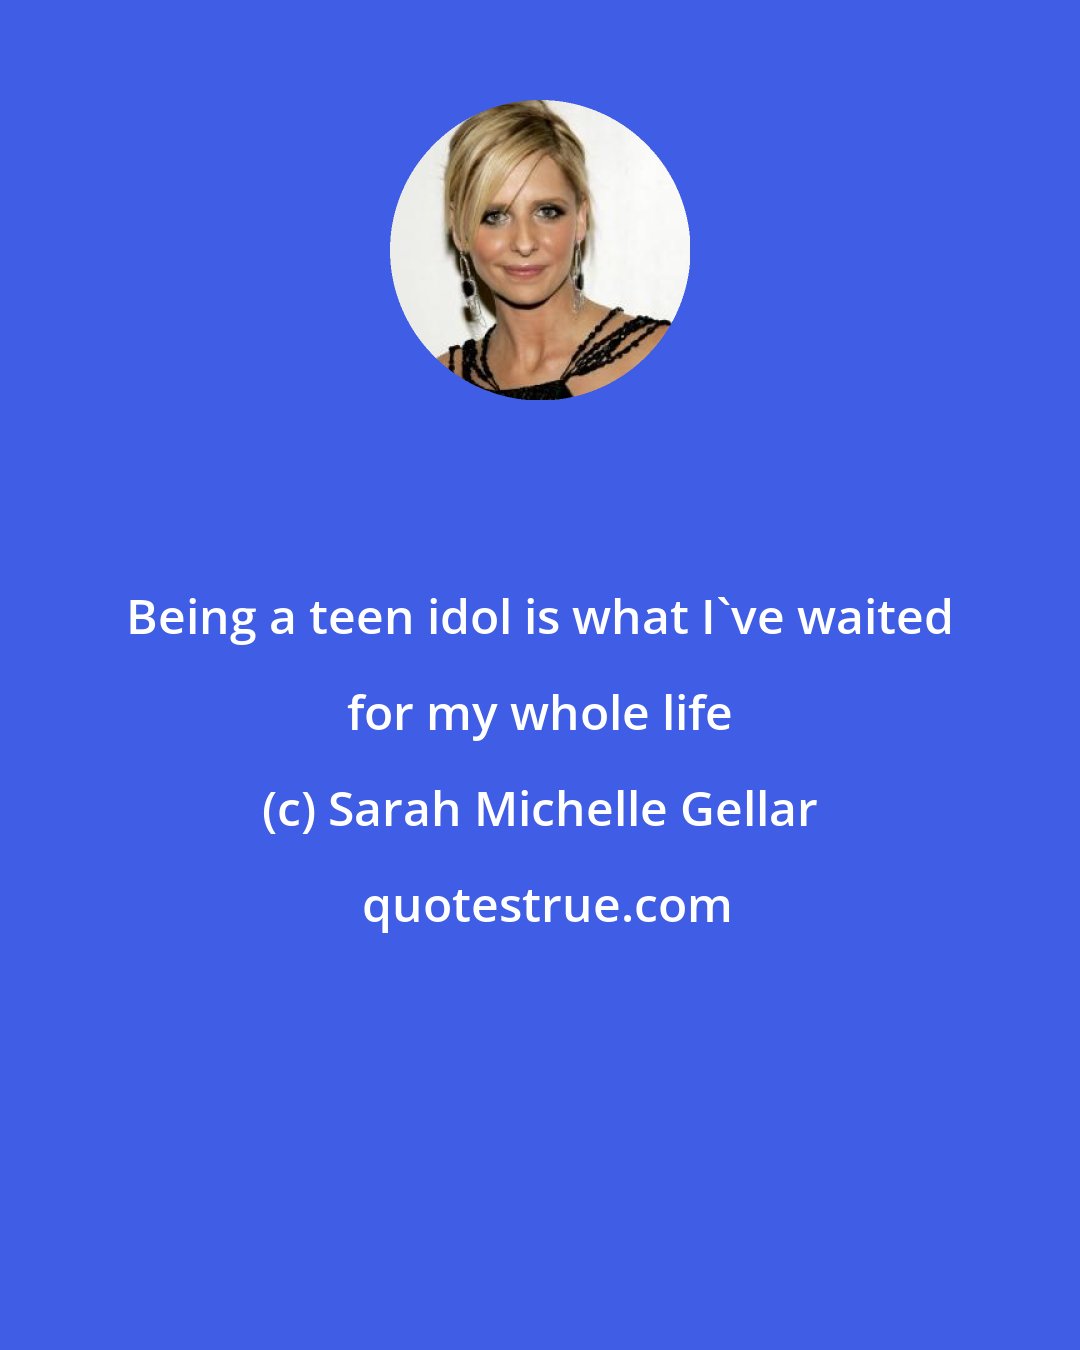 Sarah Michelle Gellar: Being a teen idol is what I've waited for my whole life